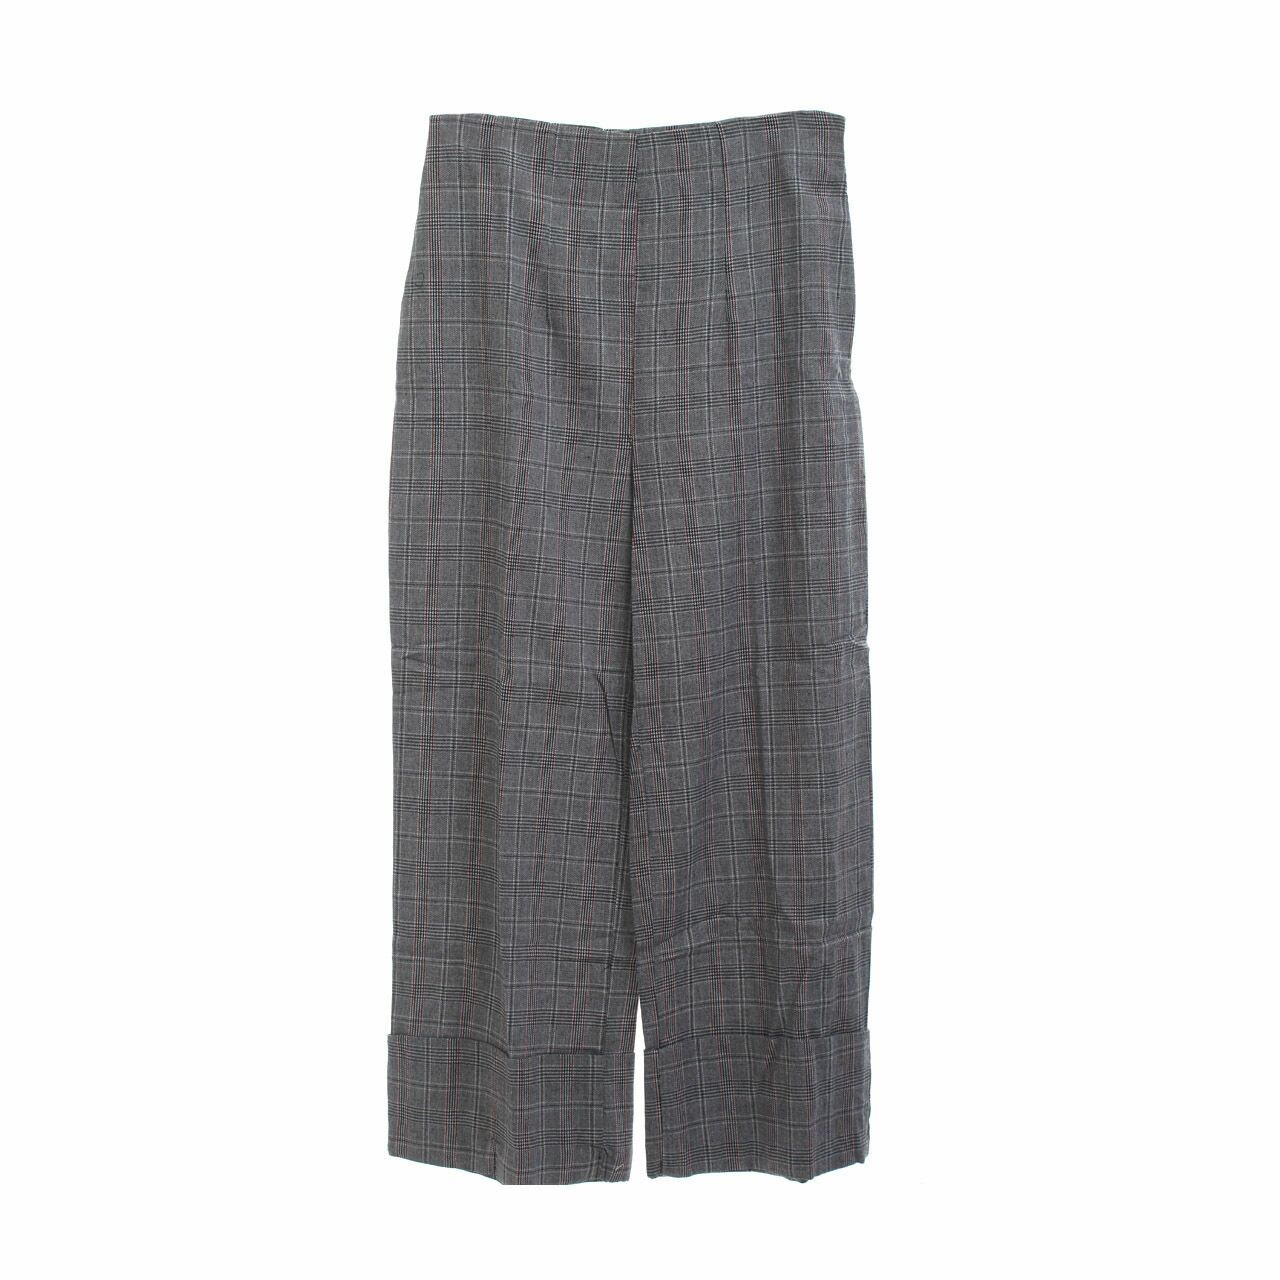 Grinitty Grey Houndstooth Long Pants